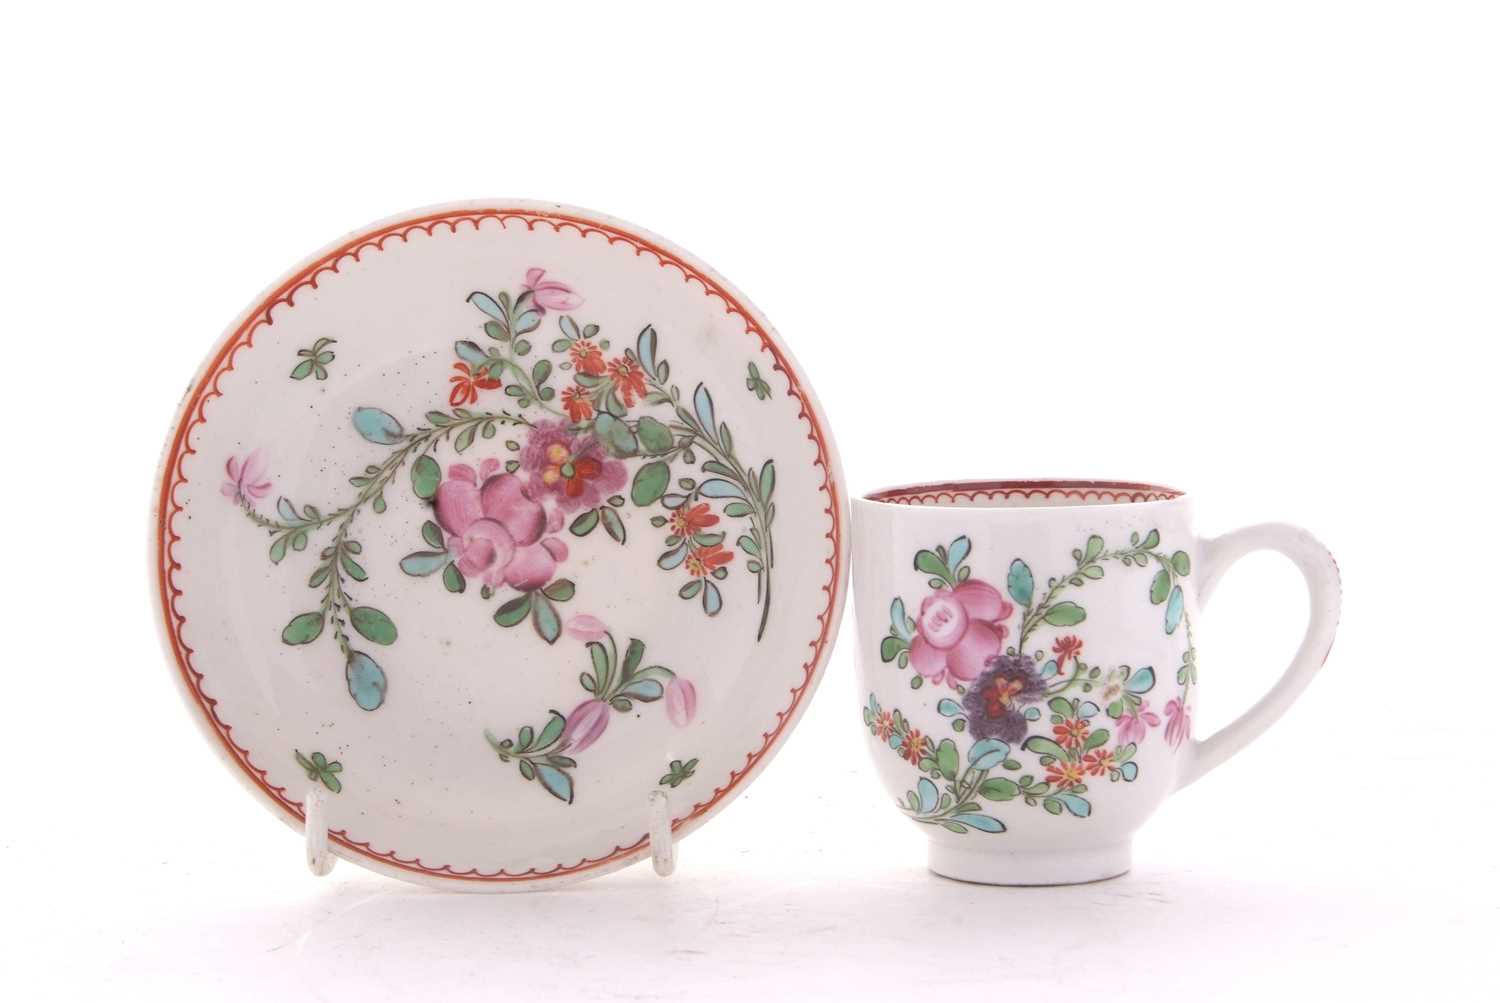 A Lowestoft porcelain cup and saucer circa 1770 with polychrome designs of flowers in Curtis - Image 2 of 4